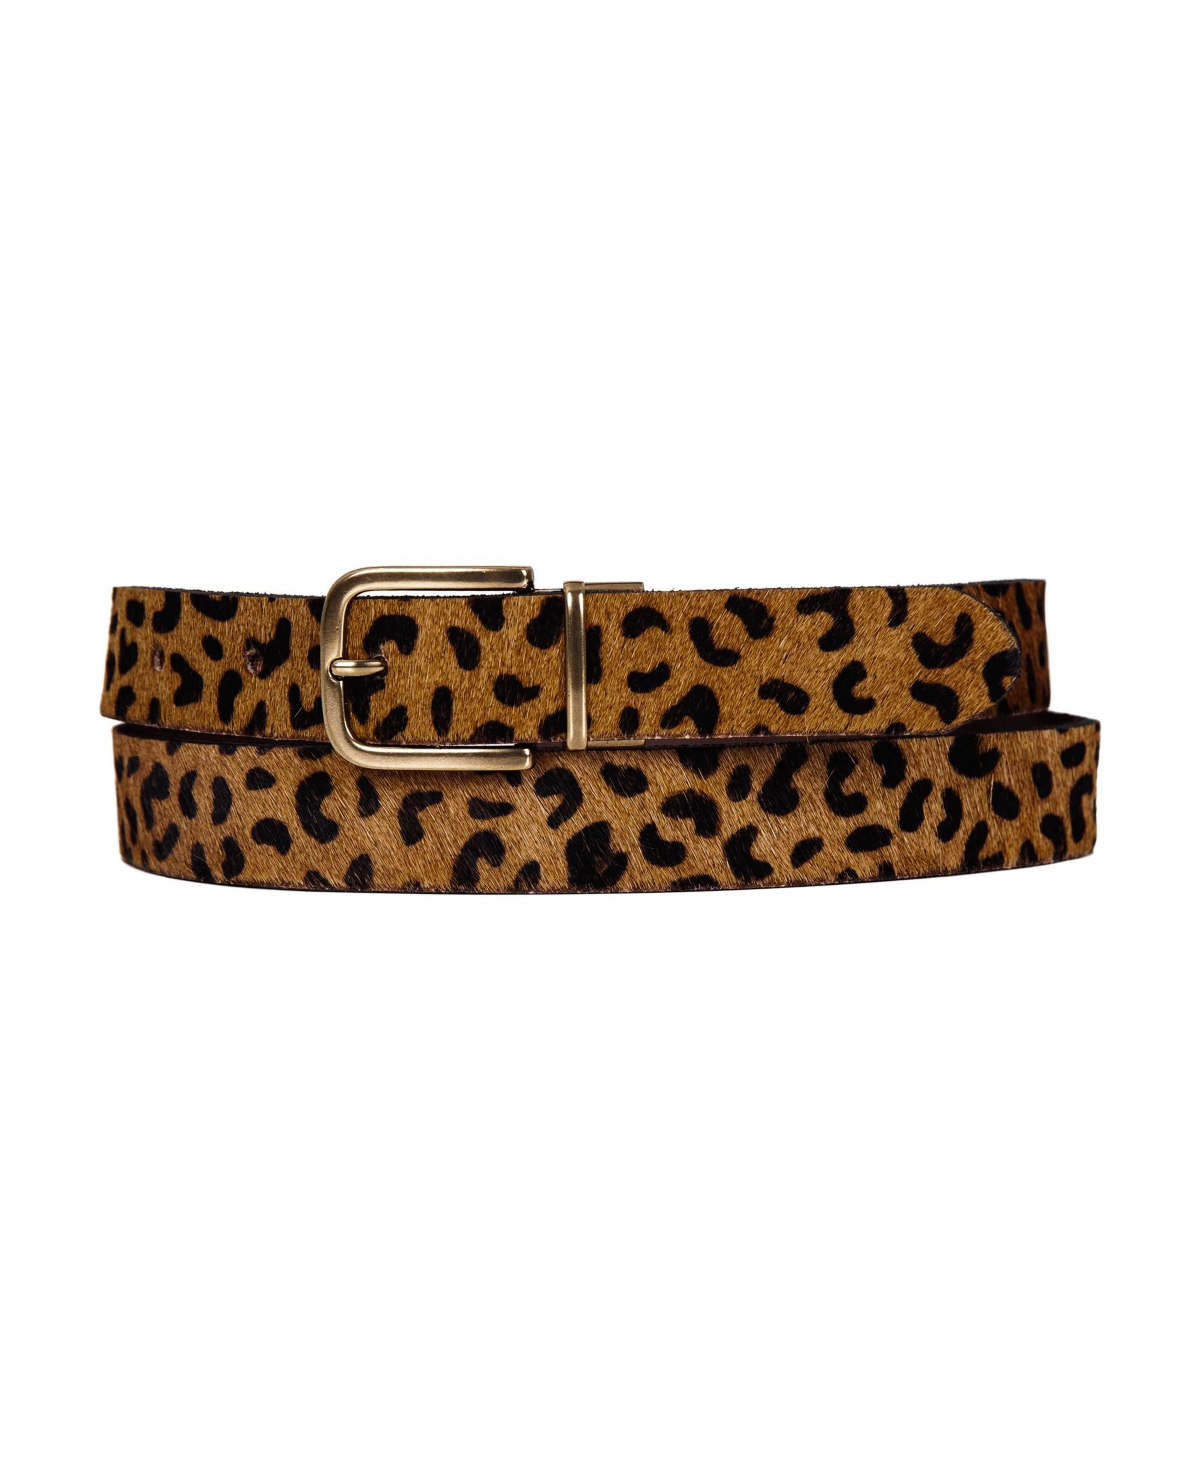 Women's Genuine Haircalf Leopard and Smooth Genuine Leather Reversible Belt - Brown